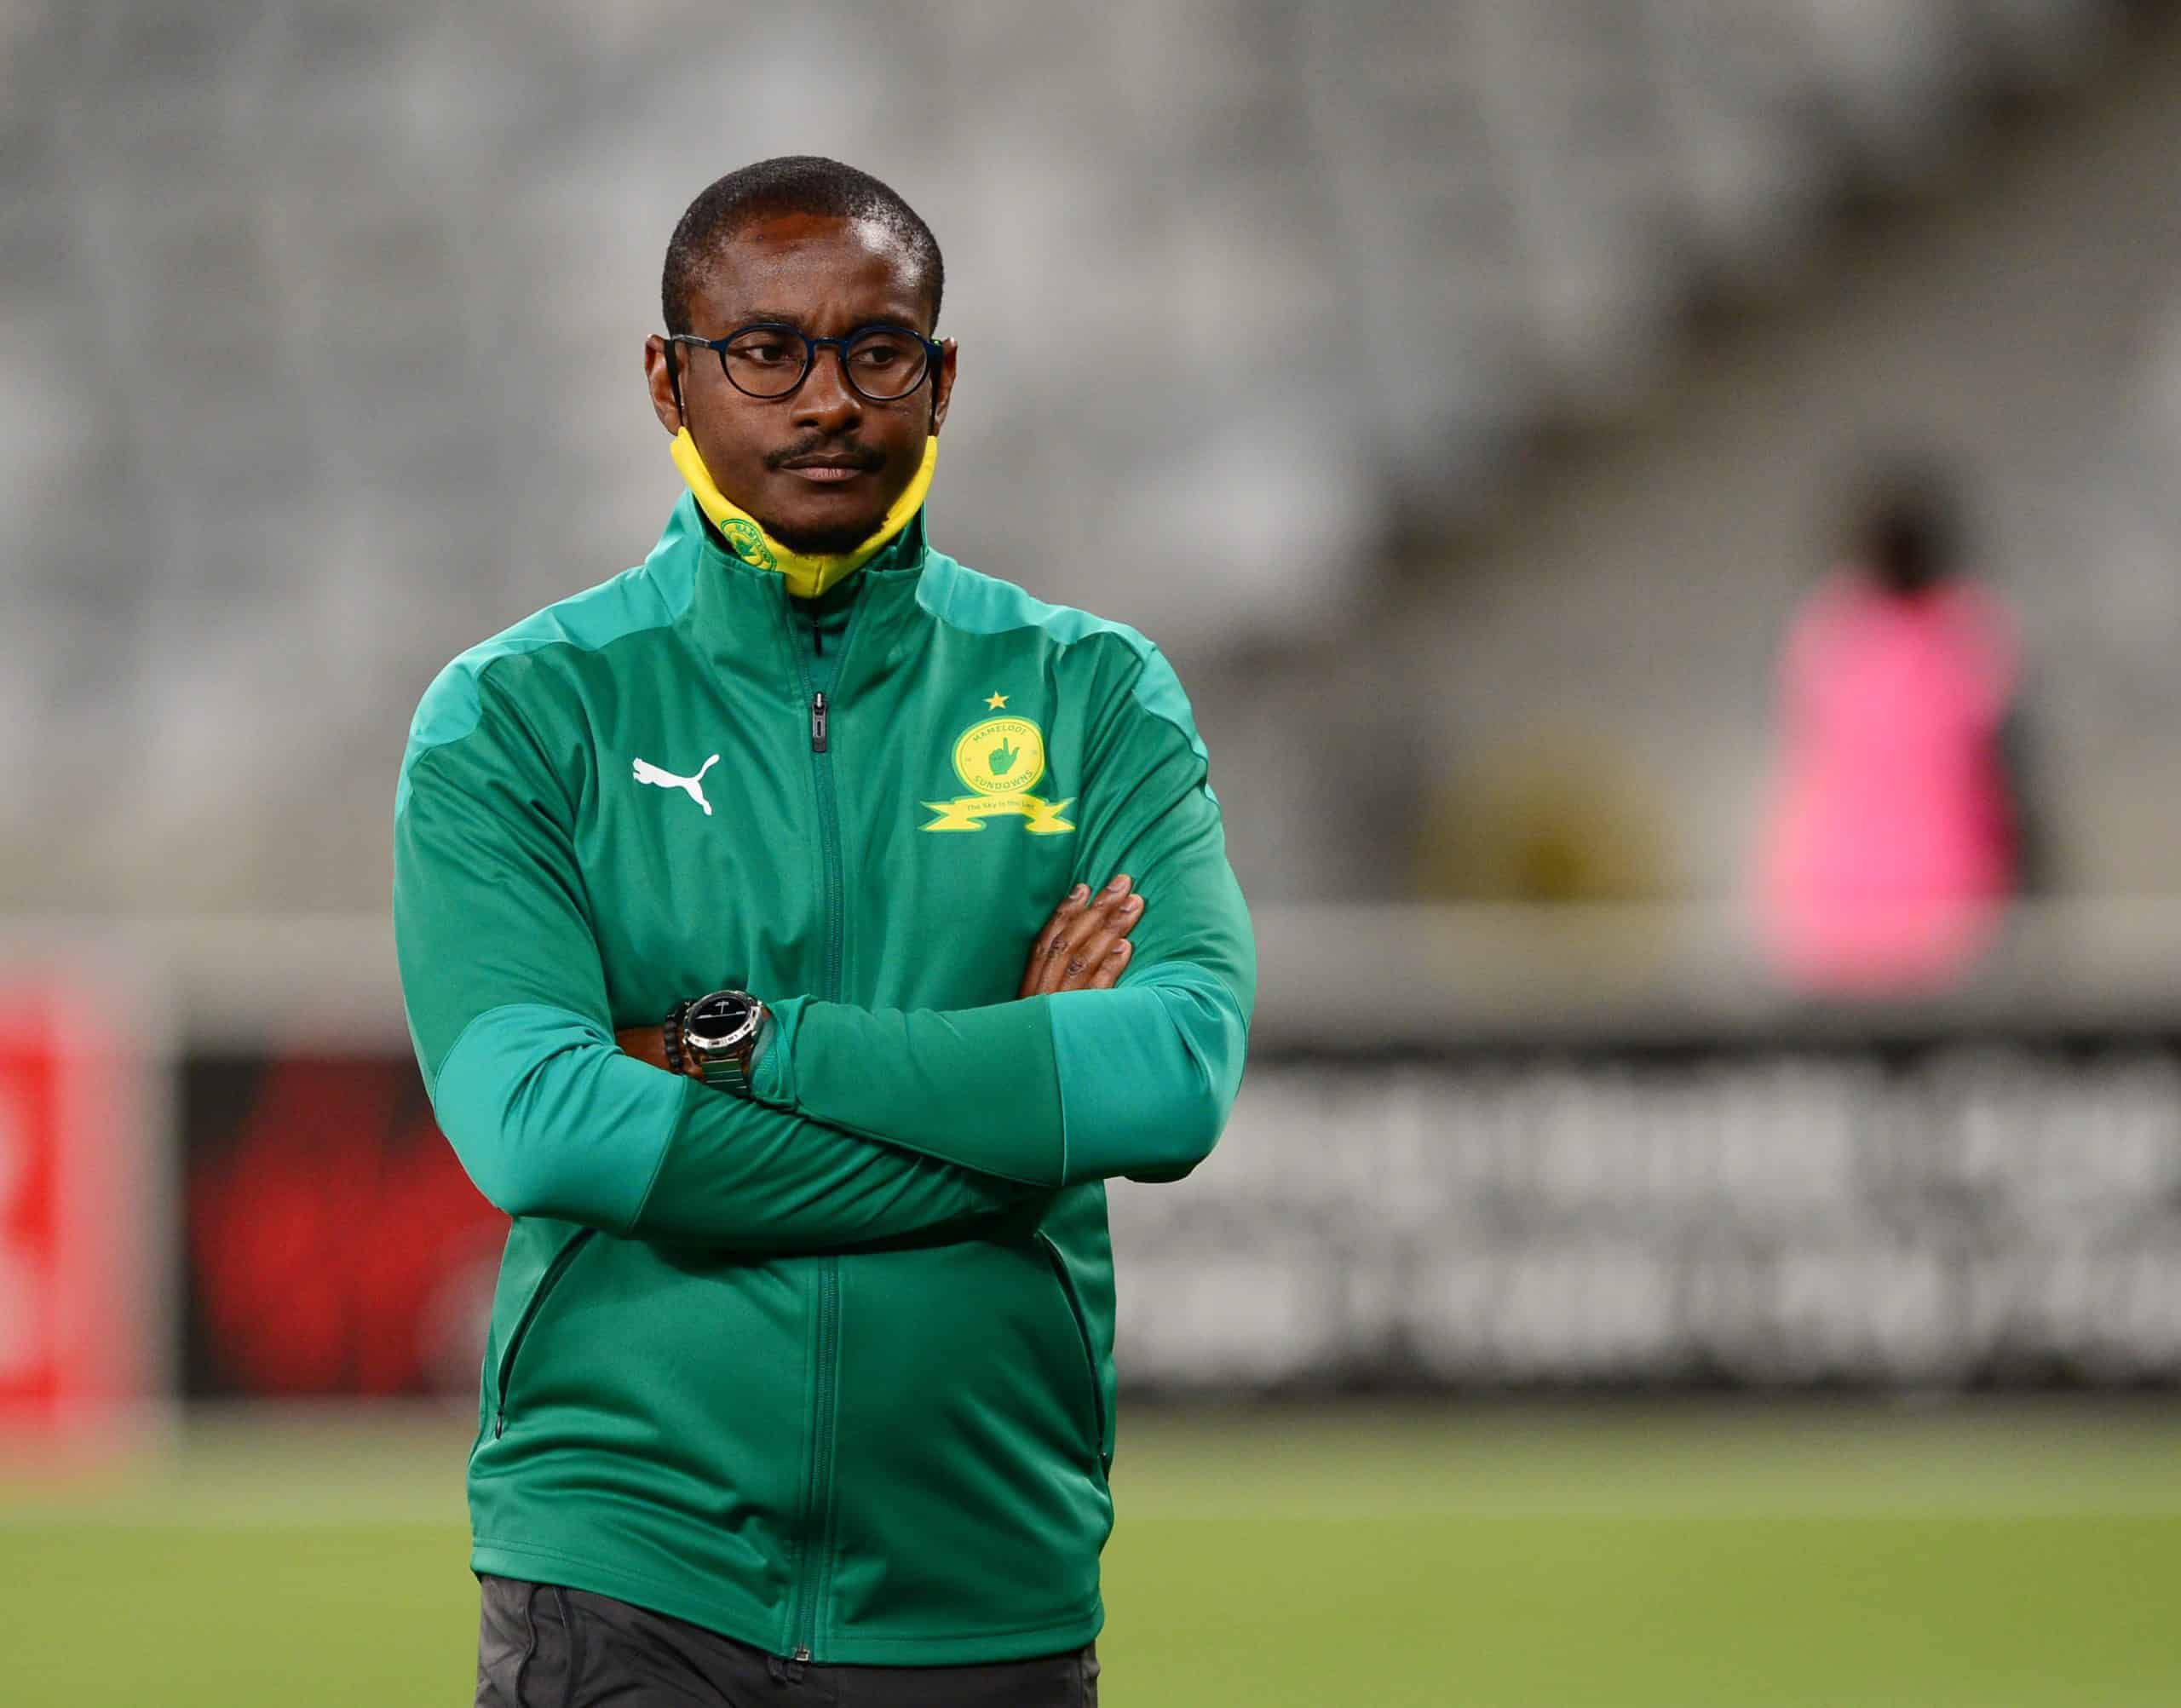 Meet the Remarkable Mamelodi Sundowns Coaches and Staff